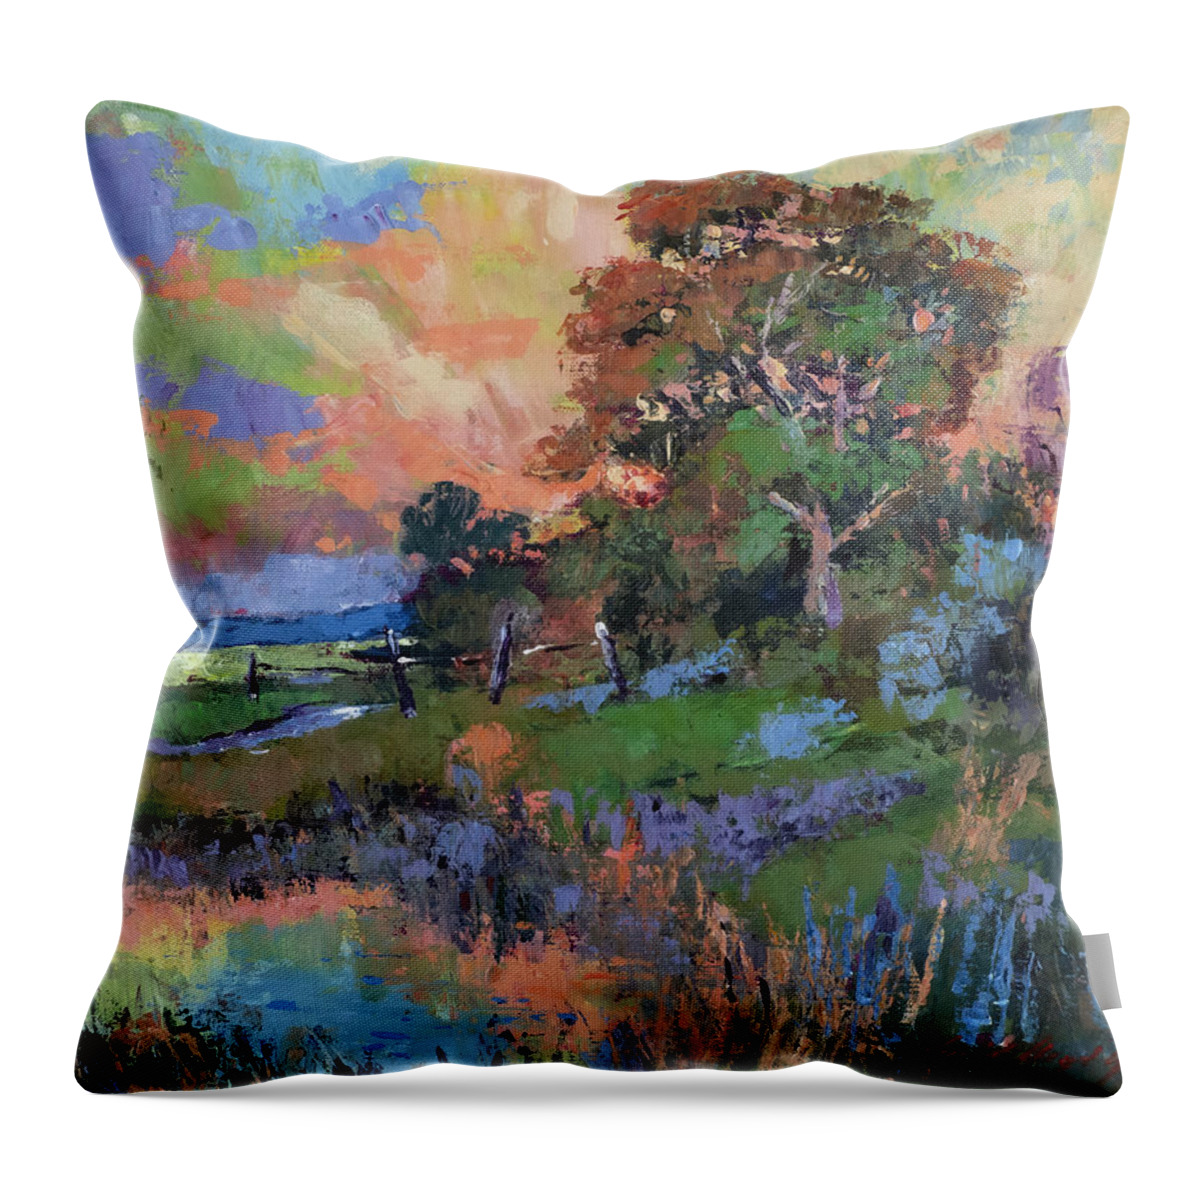 Pastoral Throw Pillow featuring the painting Evening Sky California Valley by David Lloyd Glover